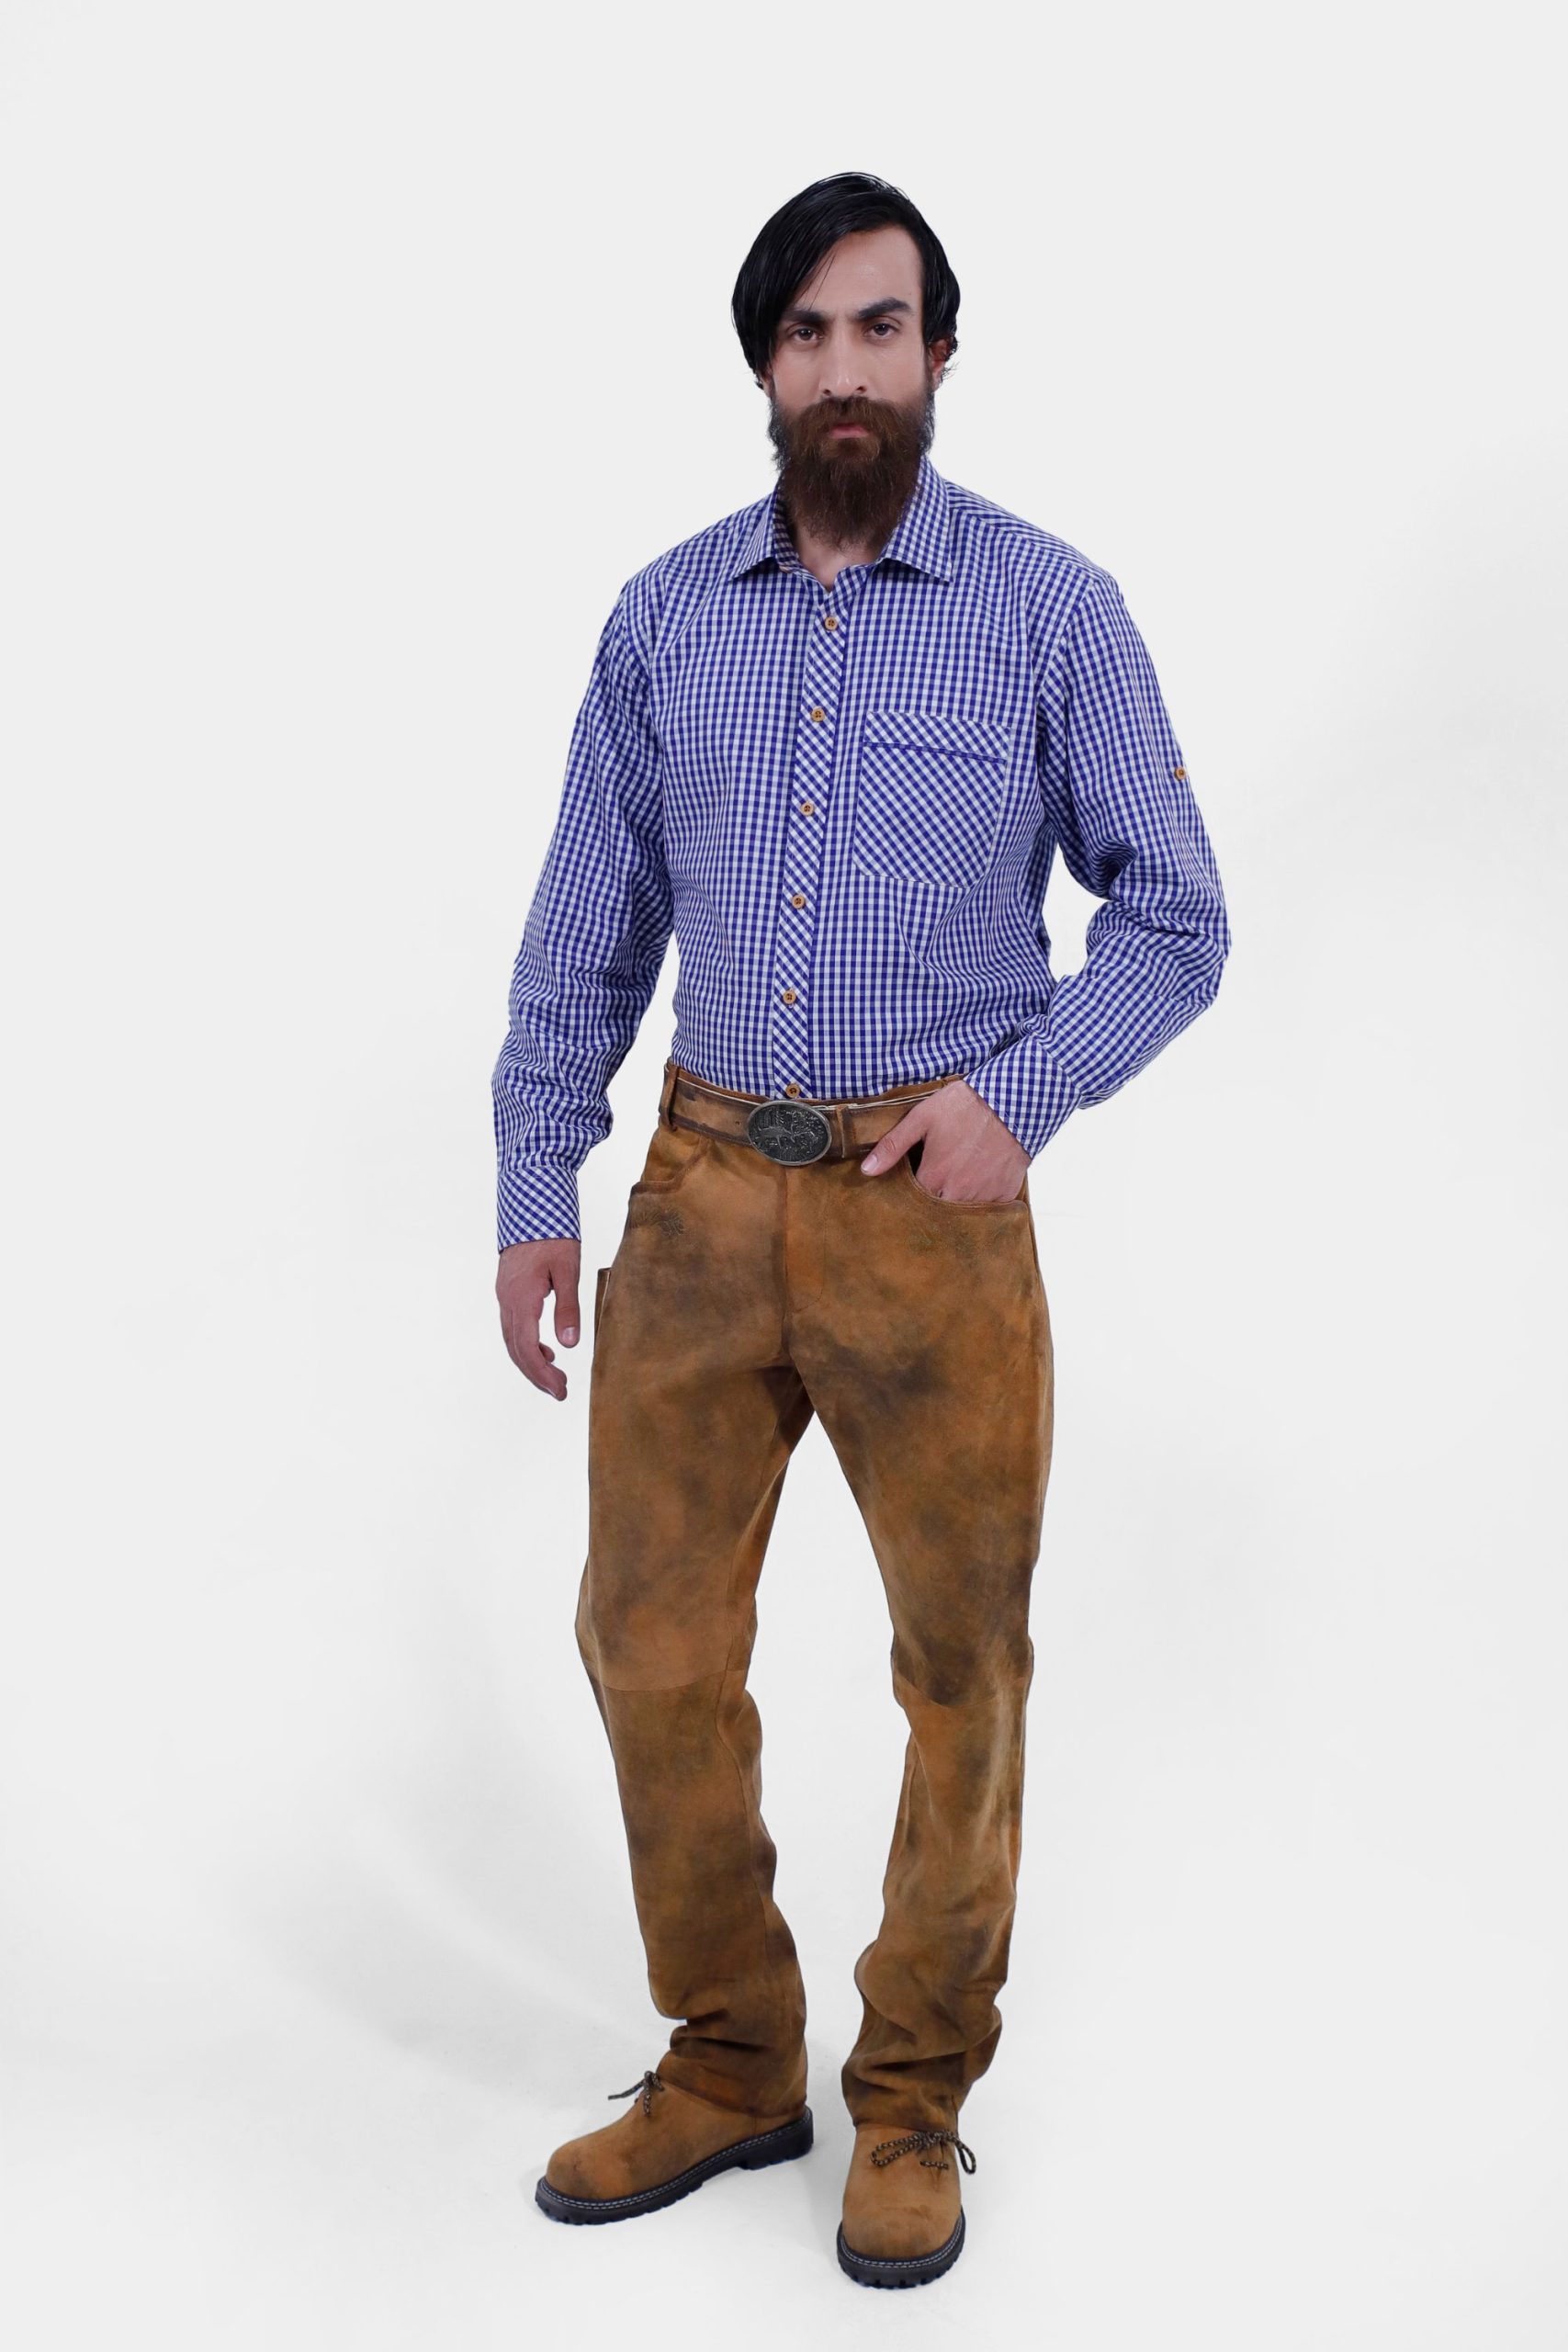 A man with a beard and long hair wearing a blue and white checkered shirt paired with brown leather lederhosen and brown boots, standing in a relaxed pose with his hands by his sides.